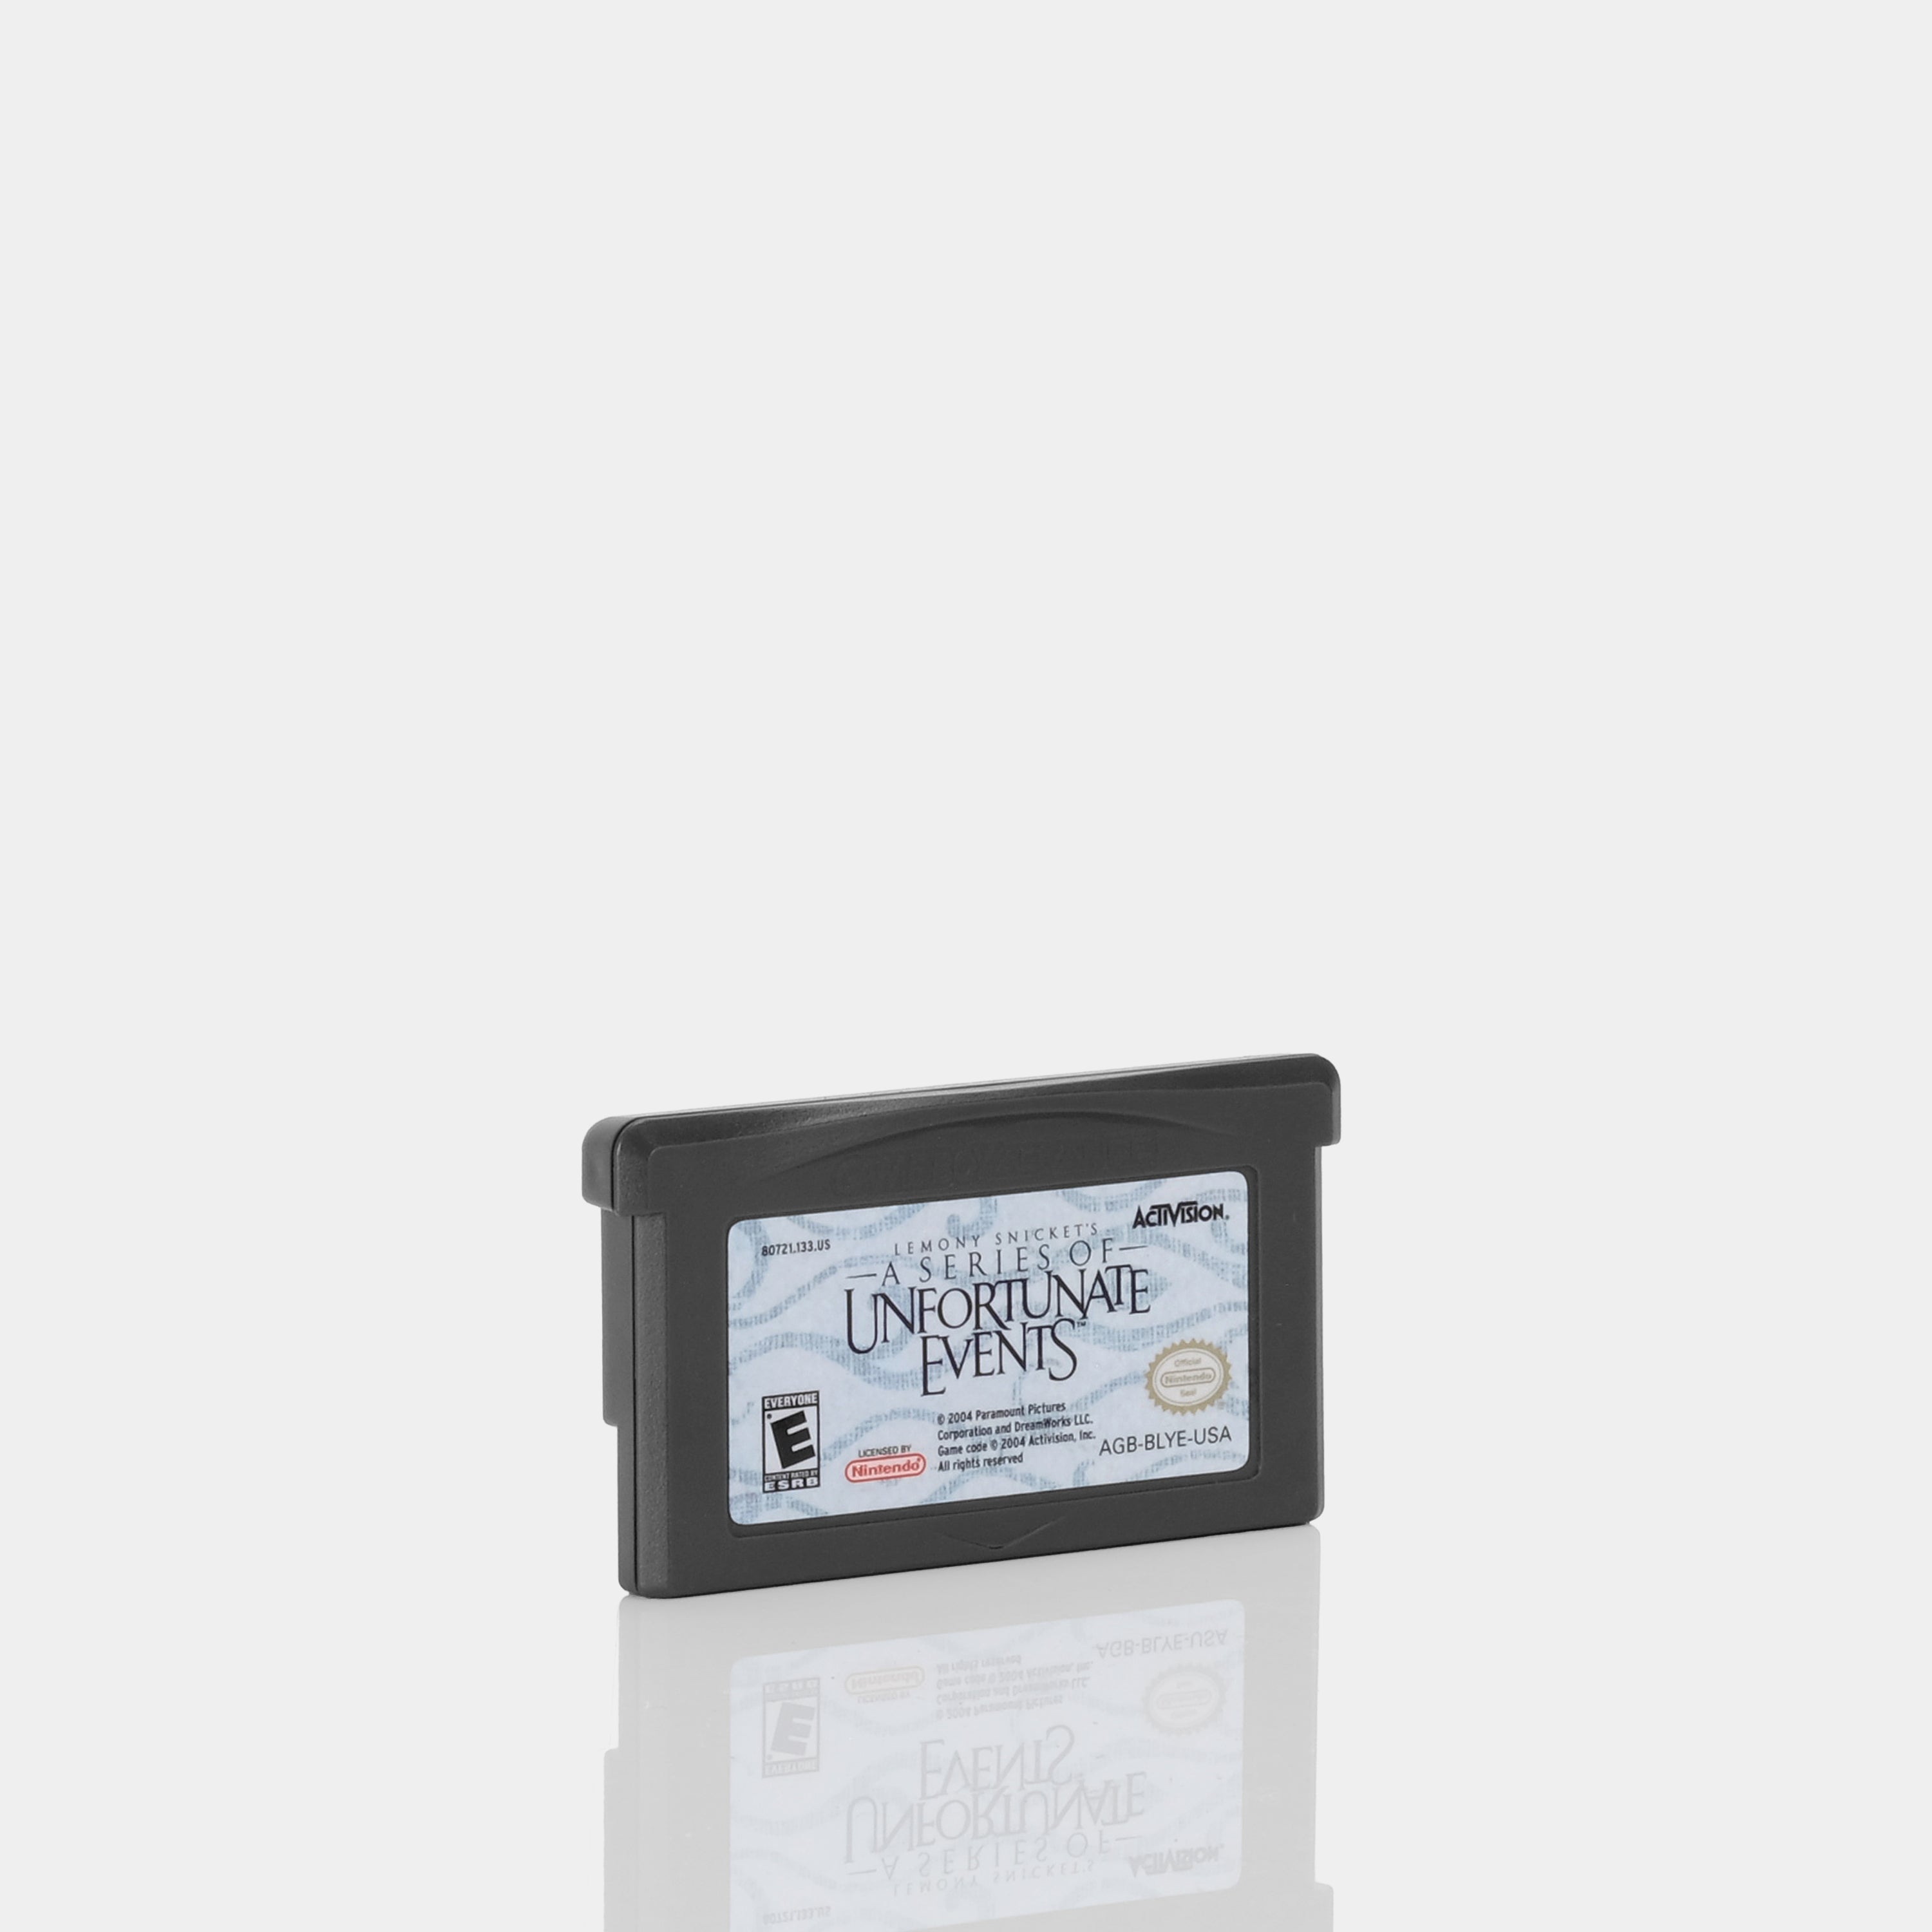 Lemony Snicket's A Series of Unfortunate Events Game Boy Advance Game